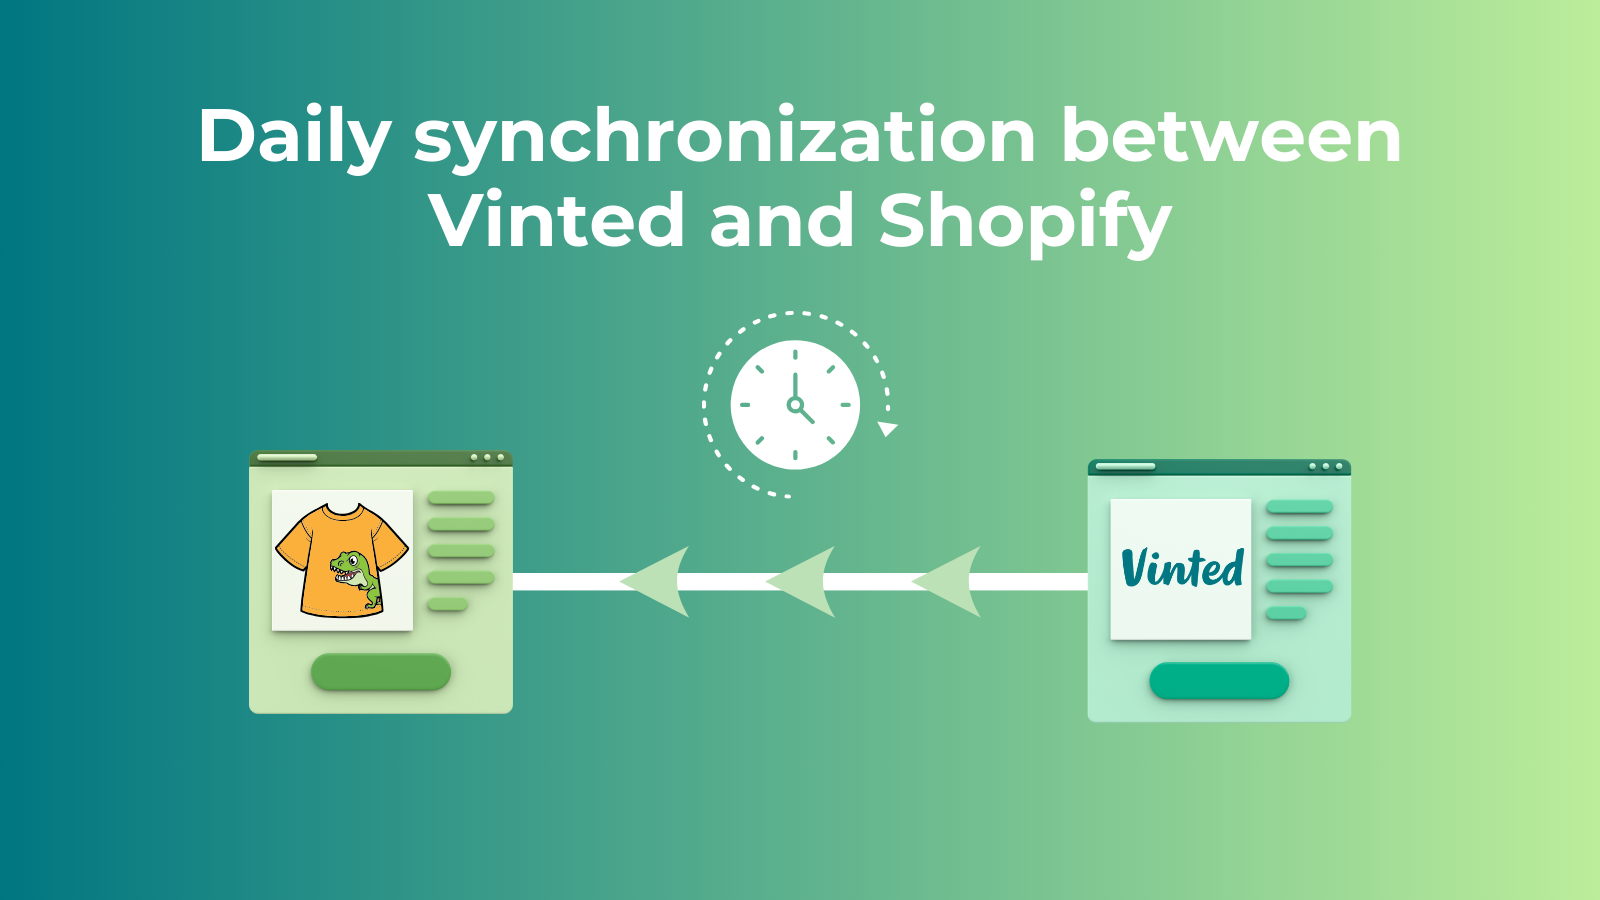 Daily synchronization between Vinted and Shopify